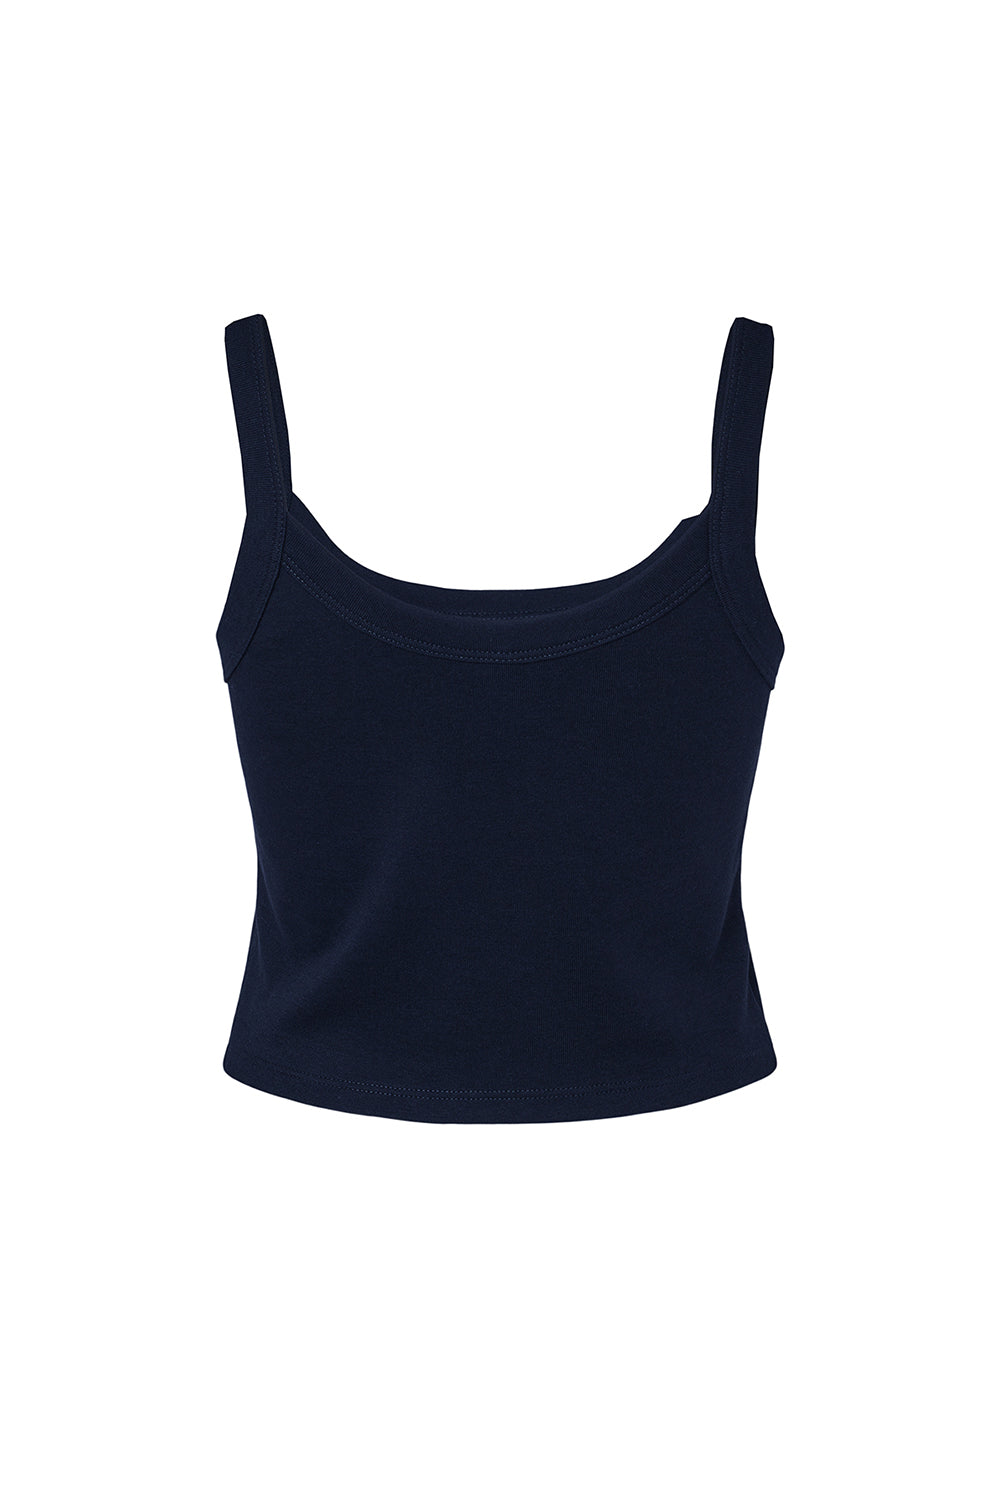 Bella + Canvas 1012BE Womens Micro Ribbed Scoop Tank Top Navy Blue Flat Back